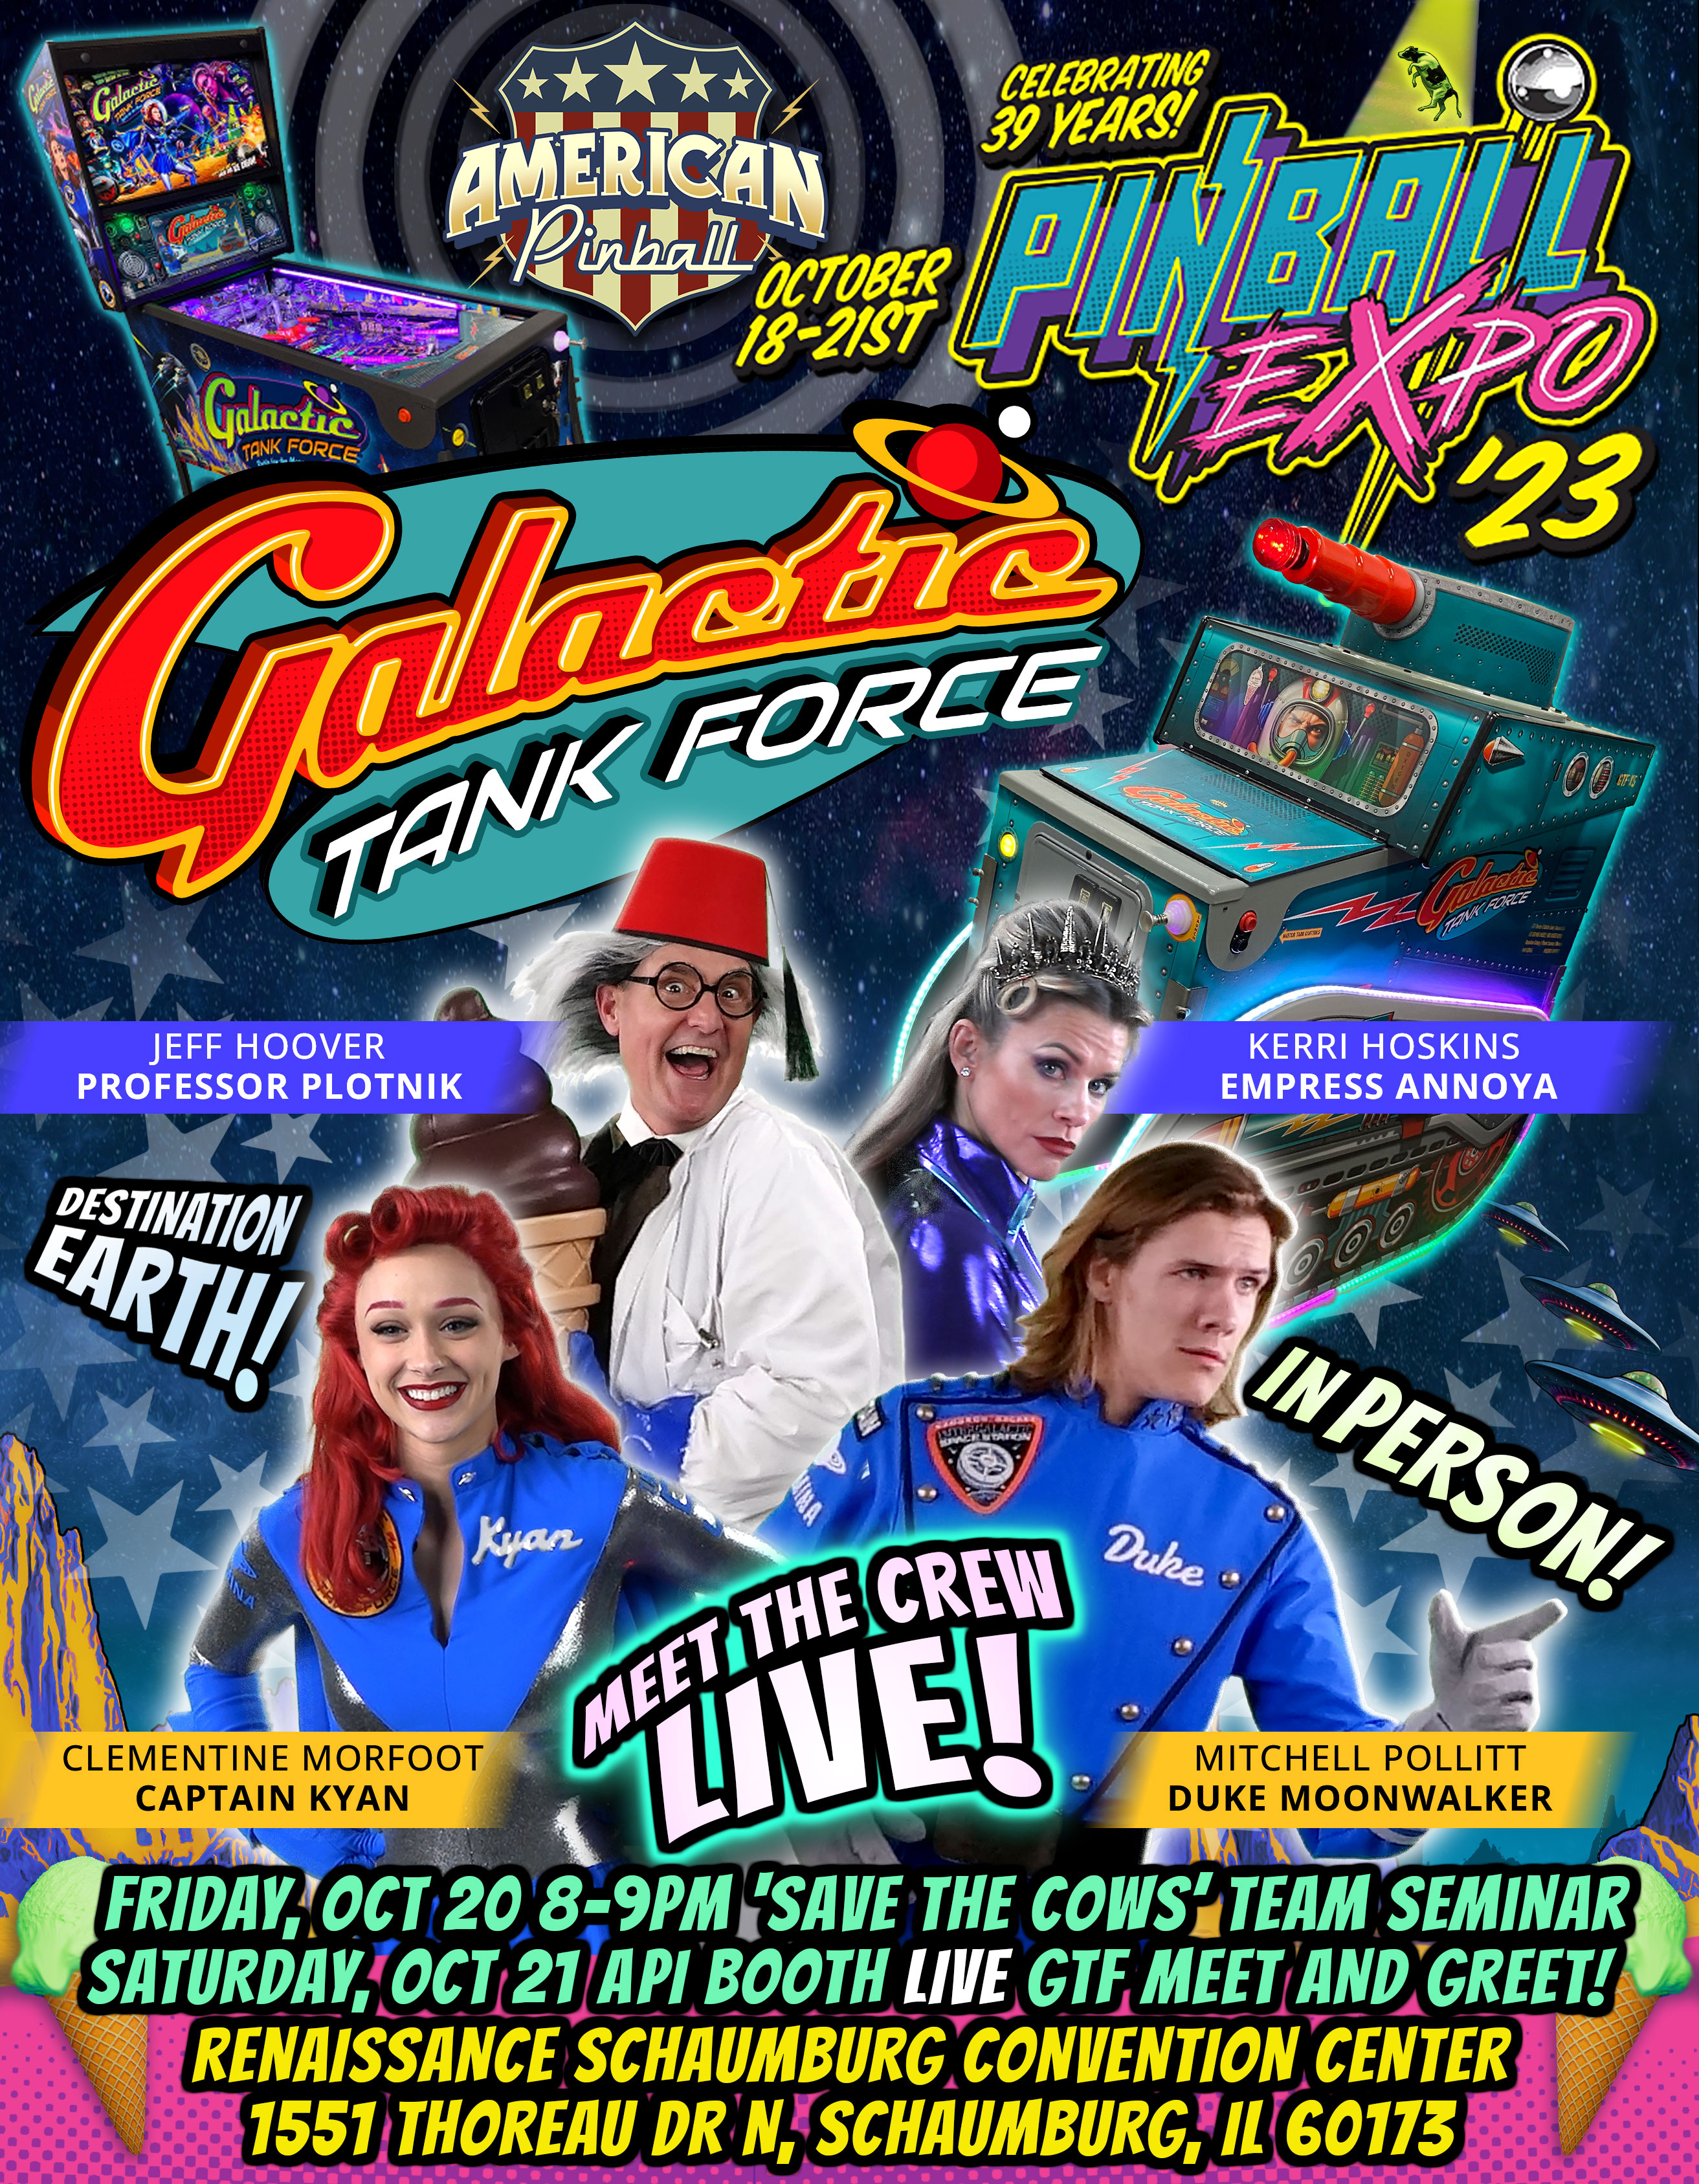 Meet the cast of Galactic Tank Force in person at the Chicago Pinball Expo!